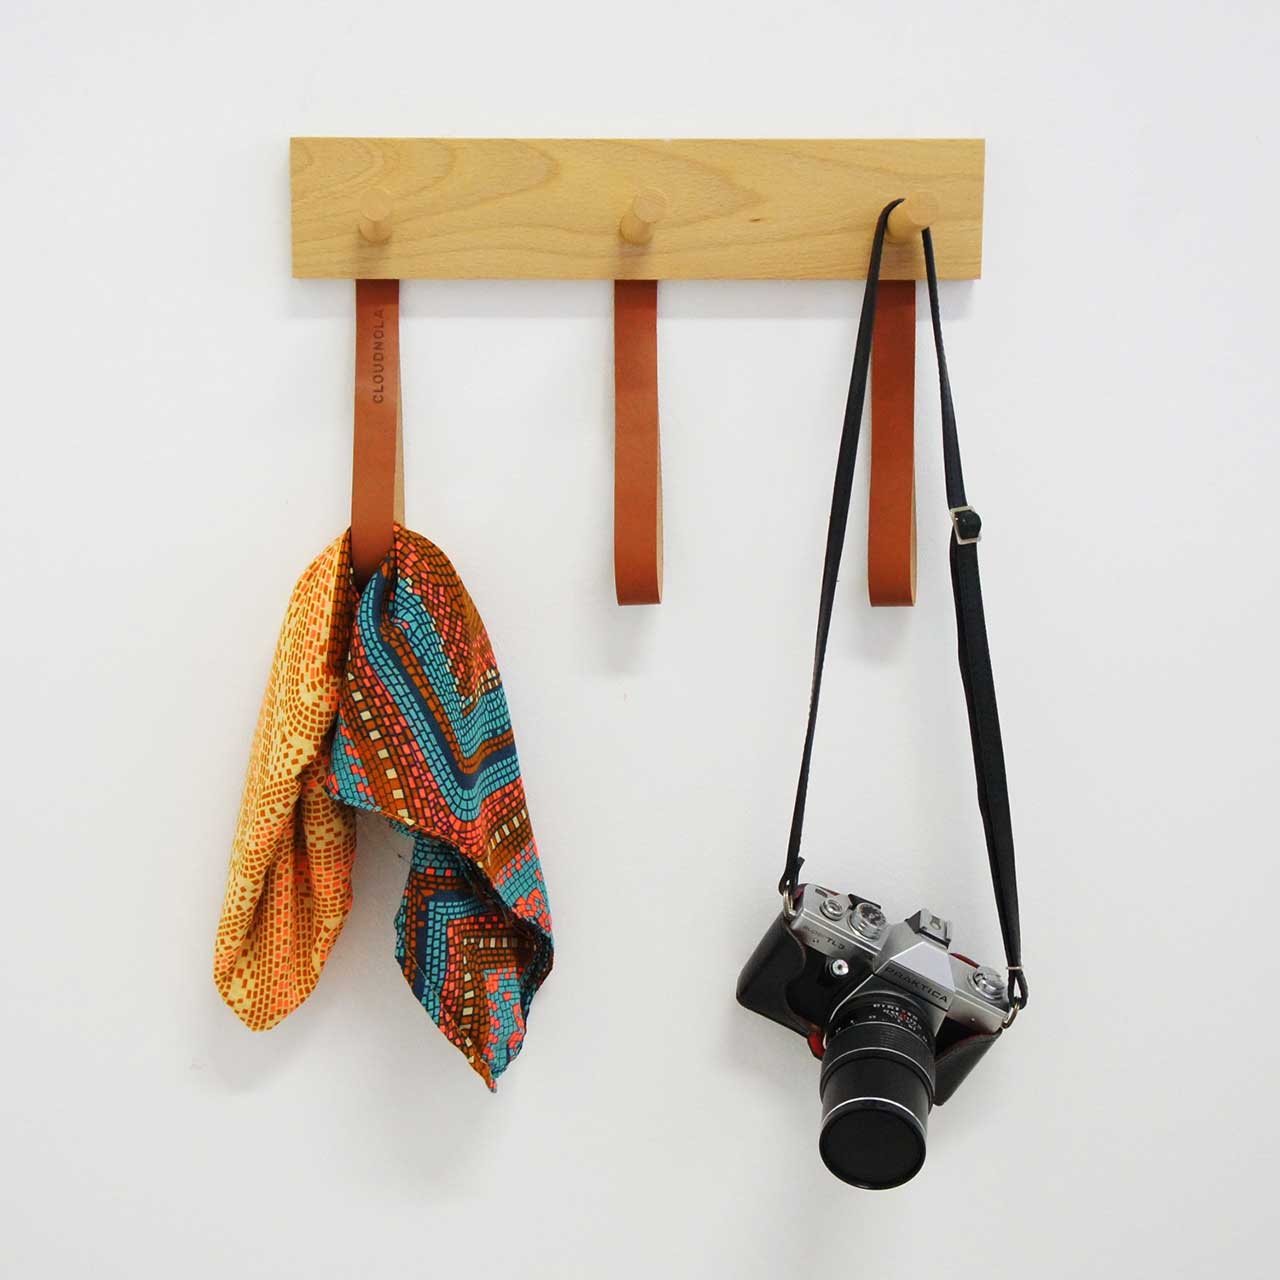 wall-mounted wooden coat rack with leather straps holding a scarf and camera